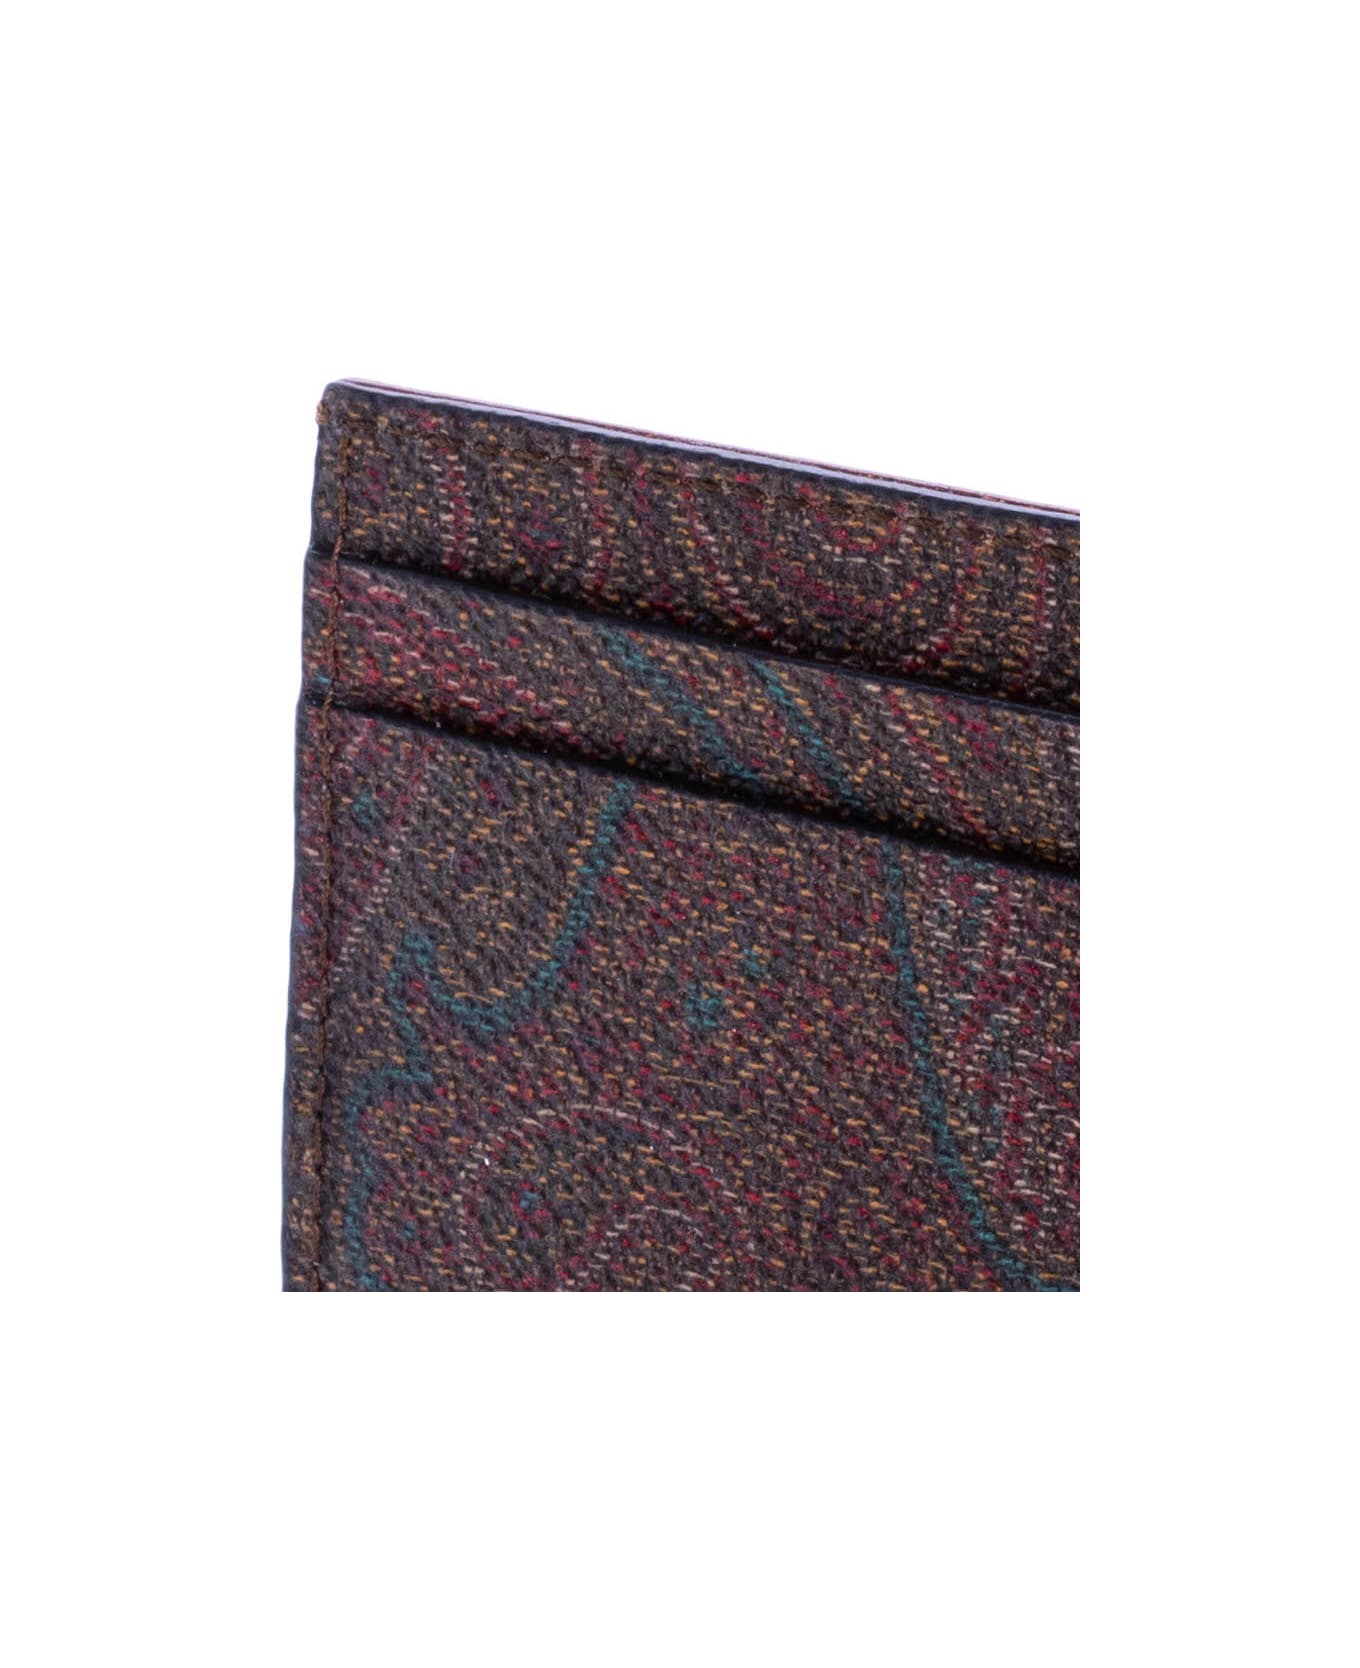 Etro "paisley" Card Holder - BROWN